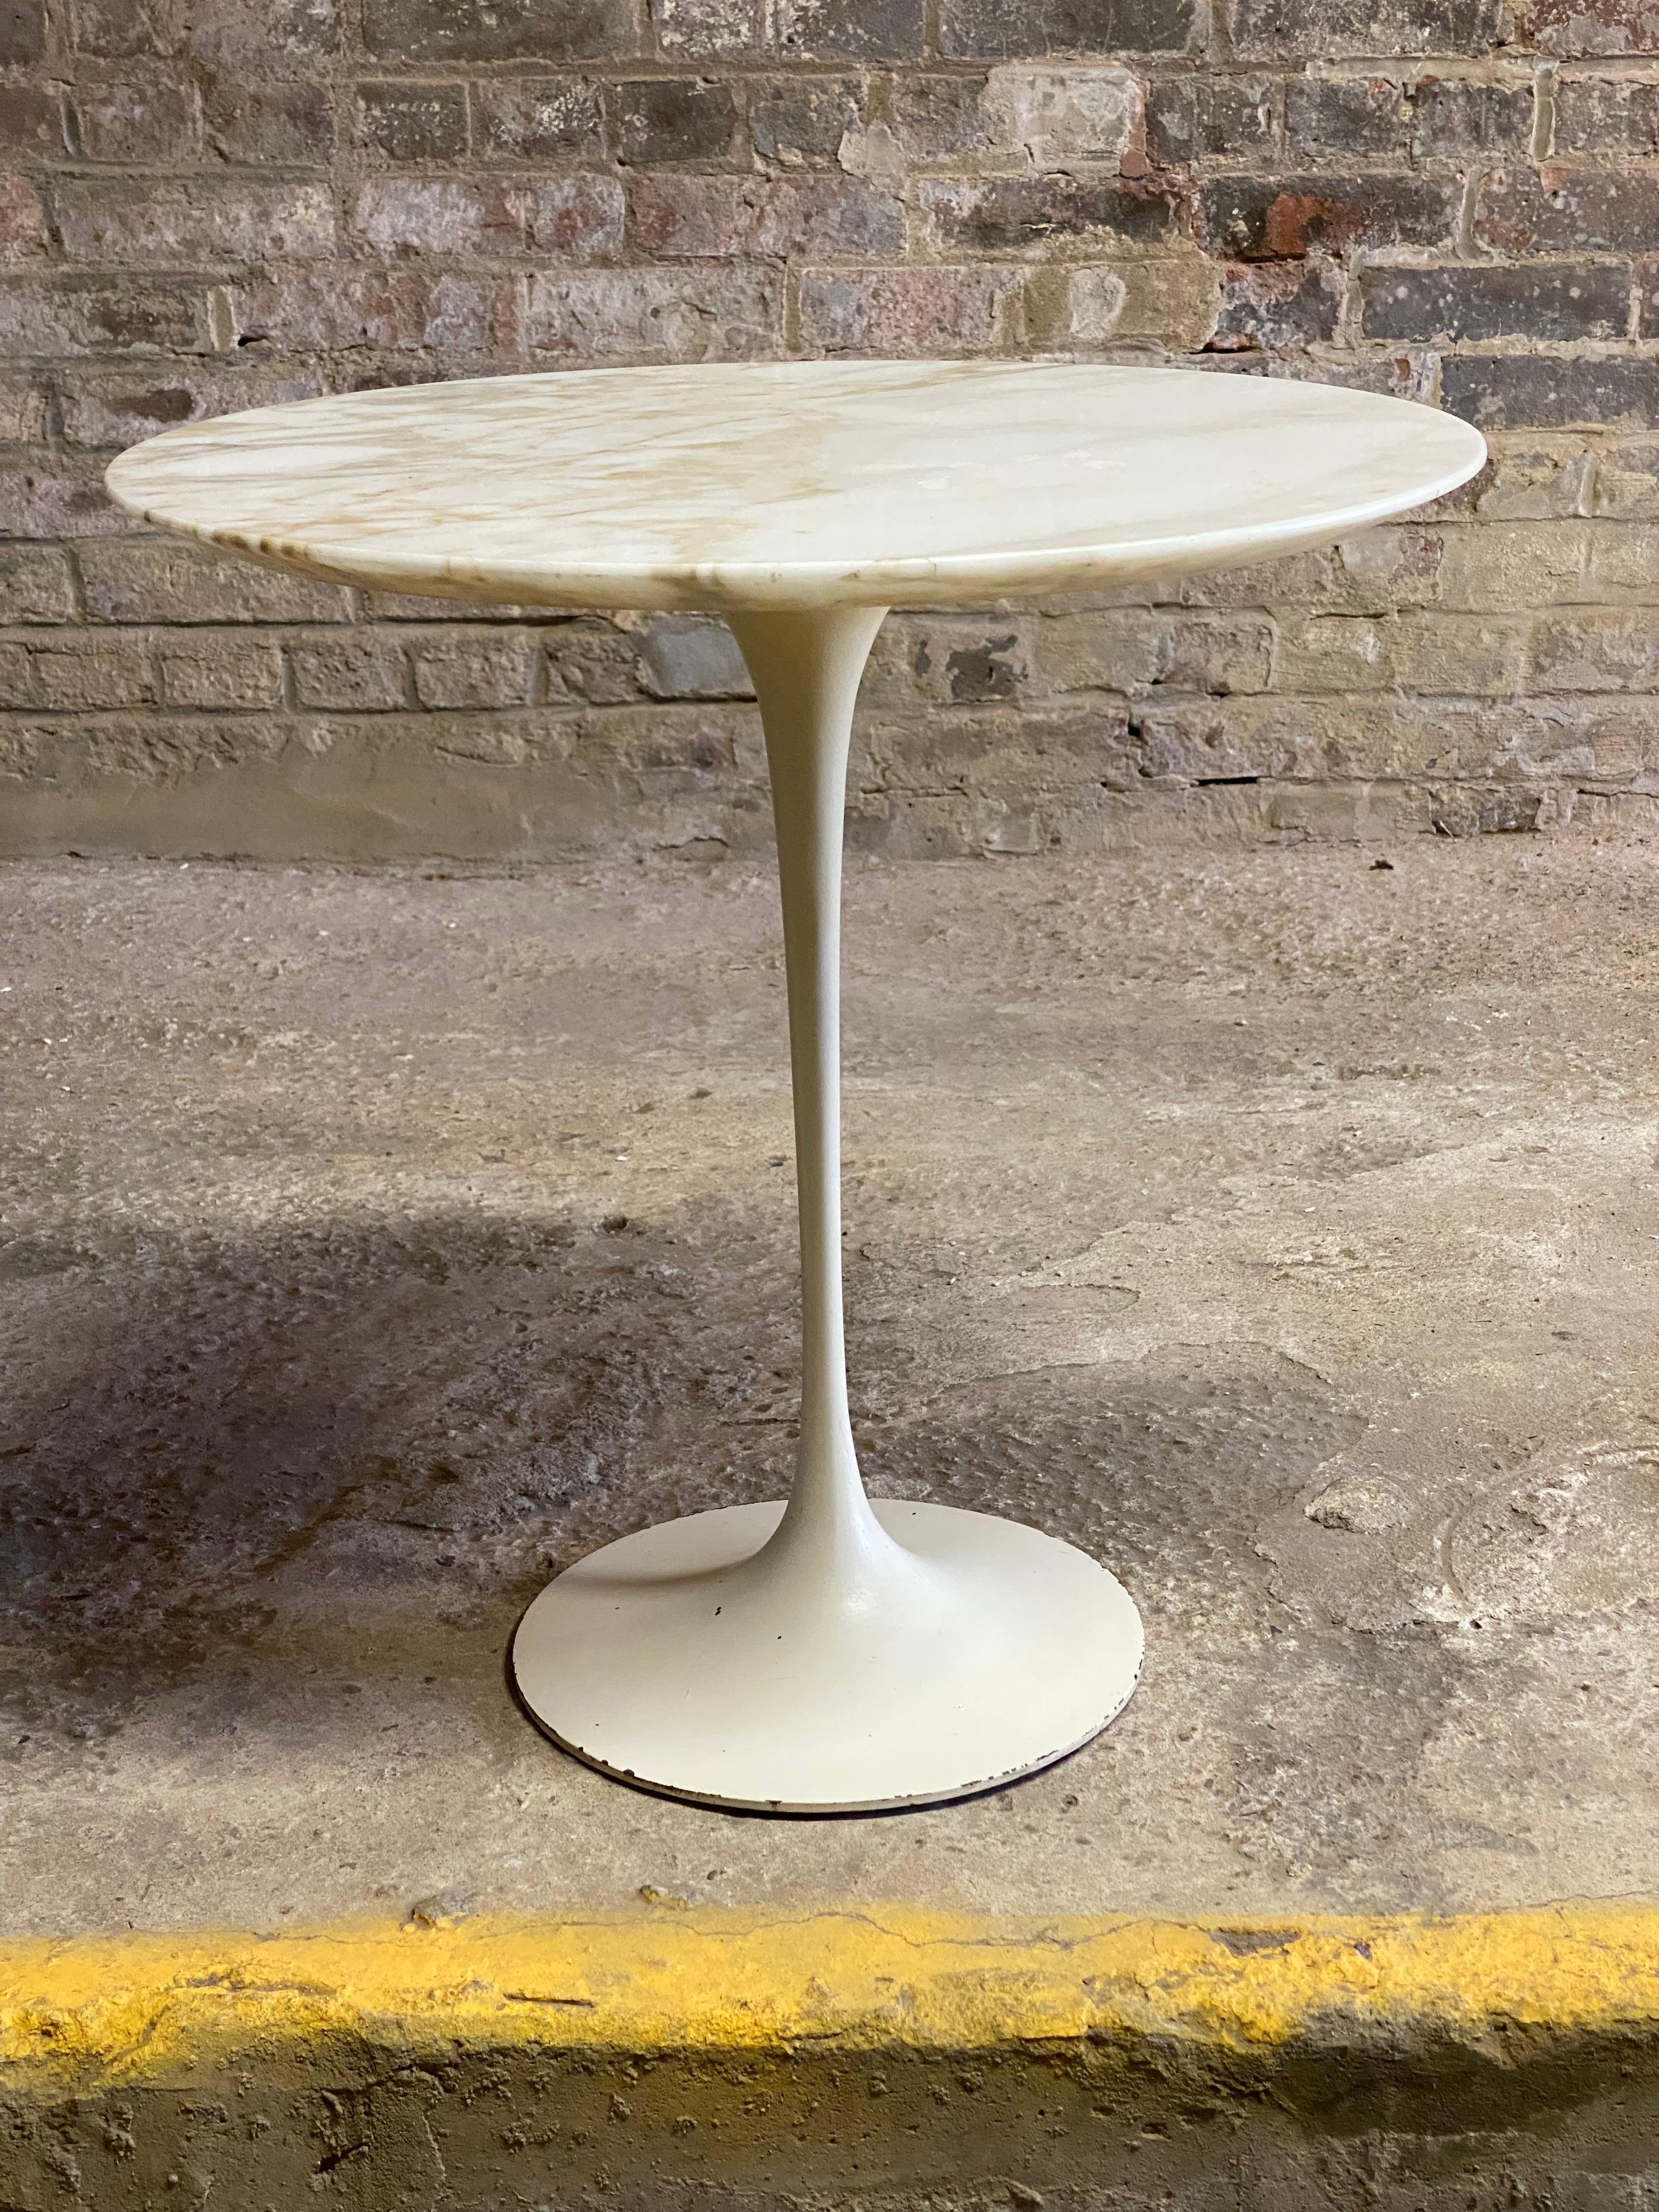 Classic Eero Saarinen for Knoll marble top tulip table. Sculptural cast aluminum base with a beveled white marble with tan and grey veining. This example dates circa 1960-1970. Good overall condition with minor enamel losses on the edge of the base